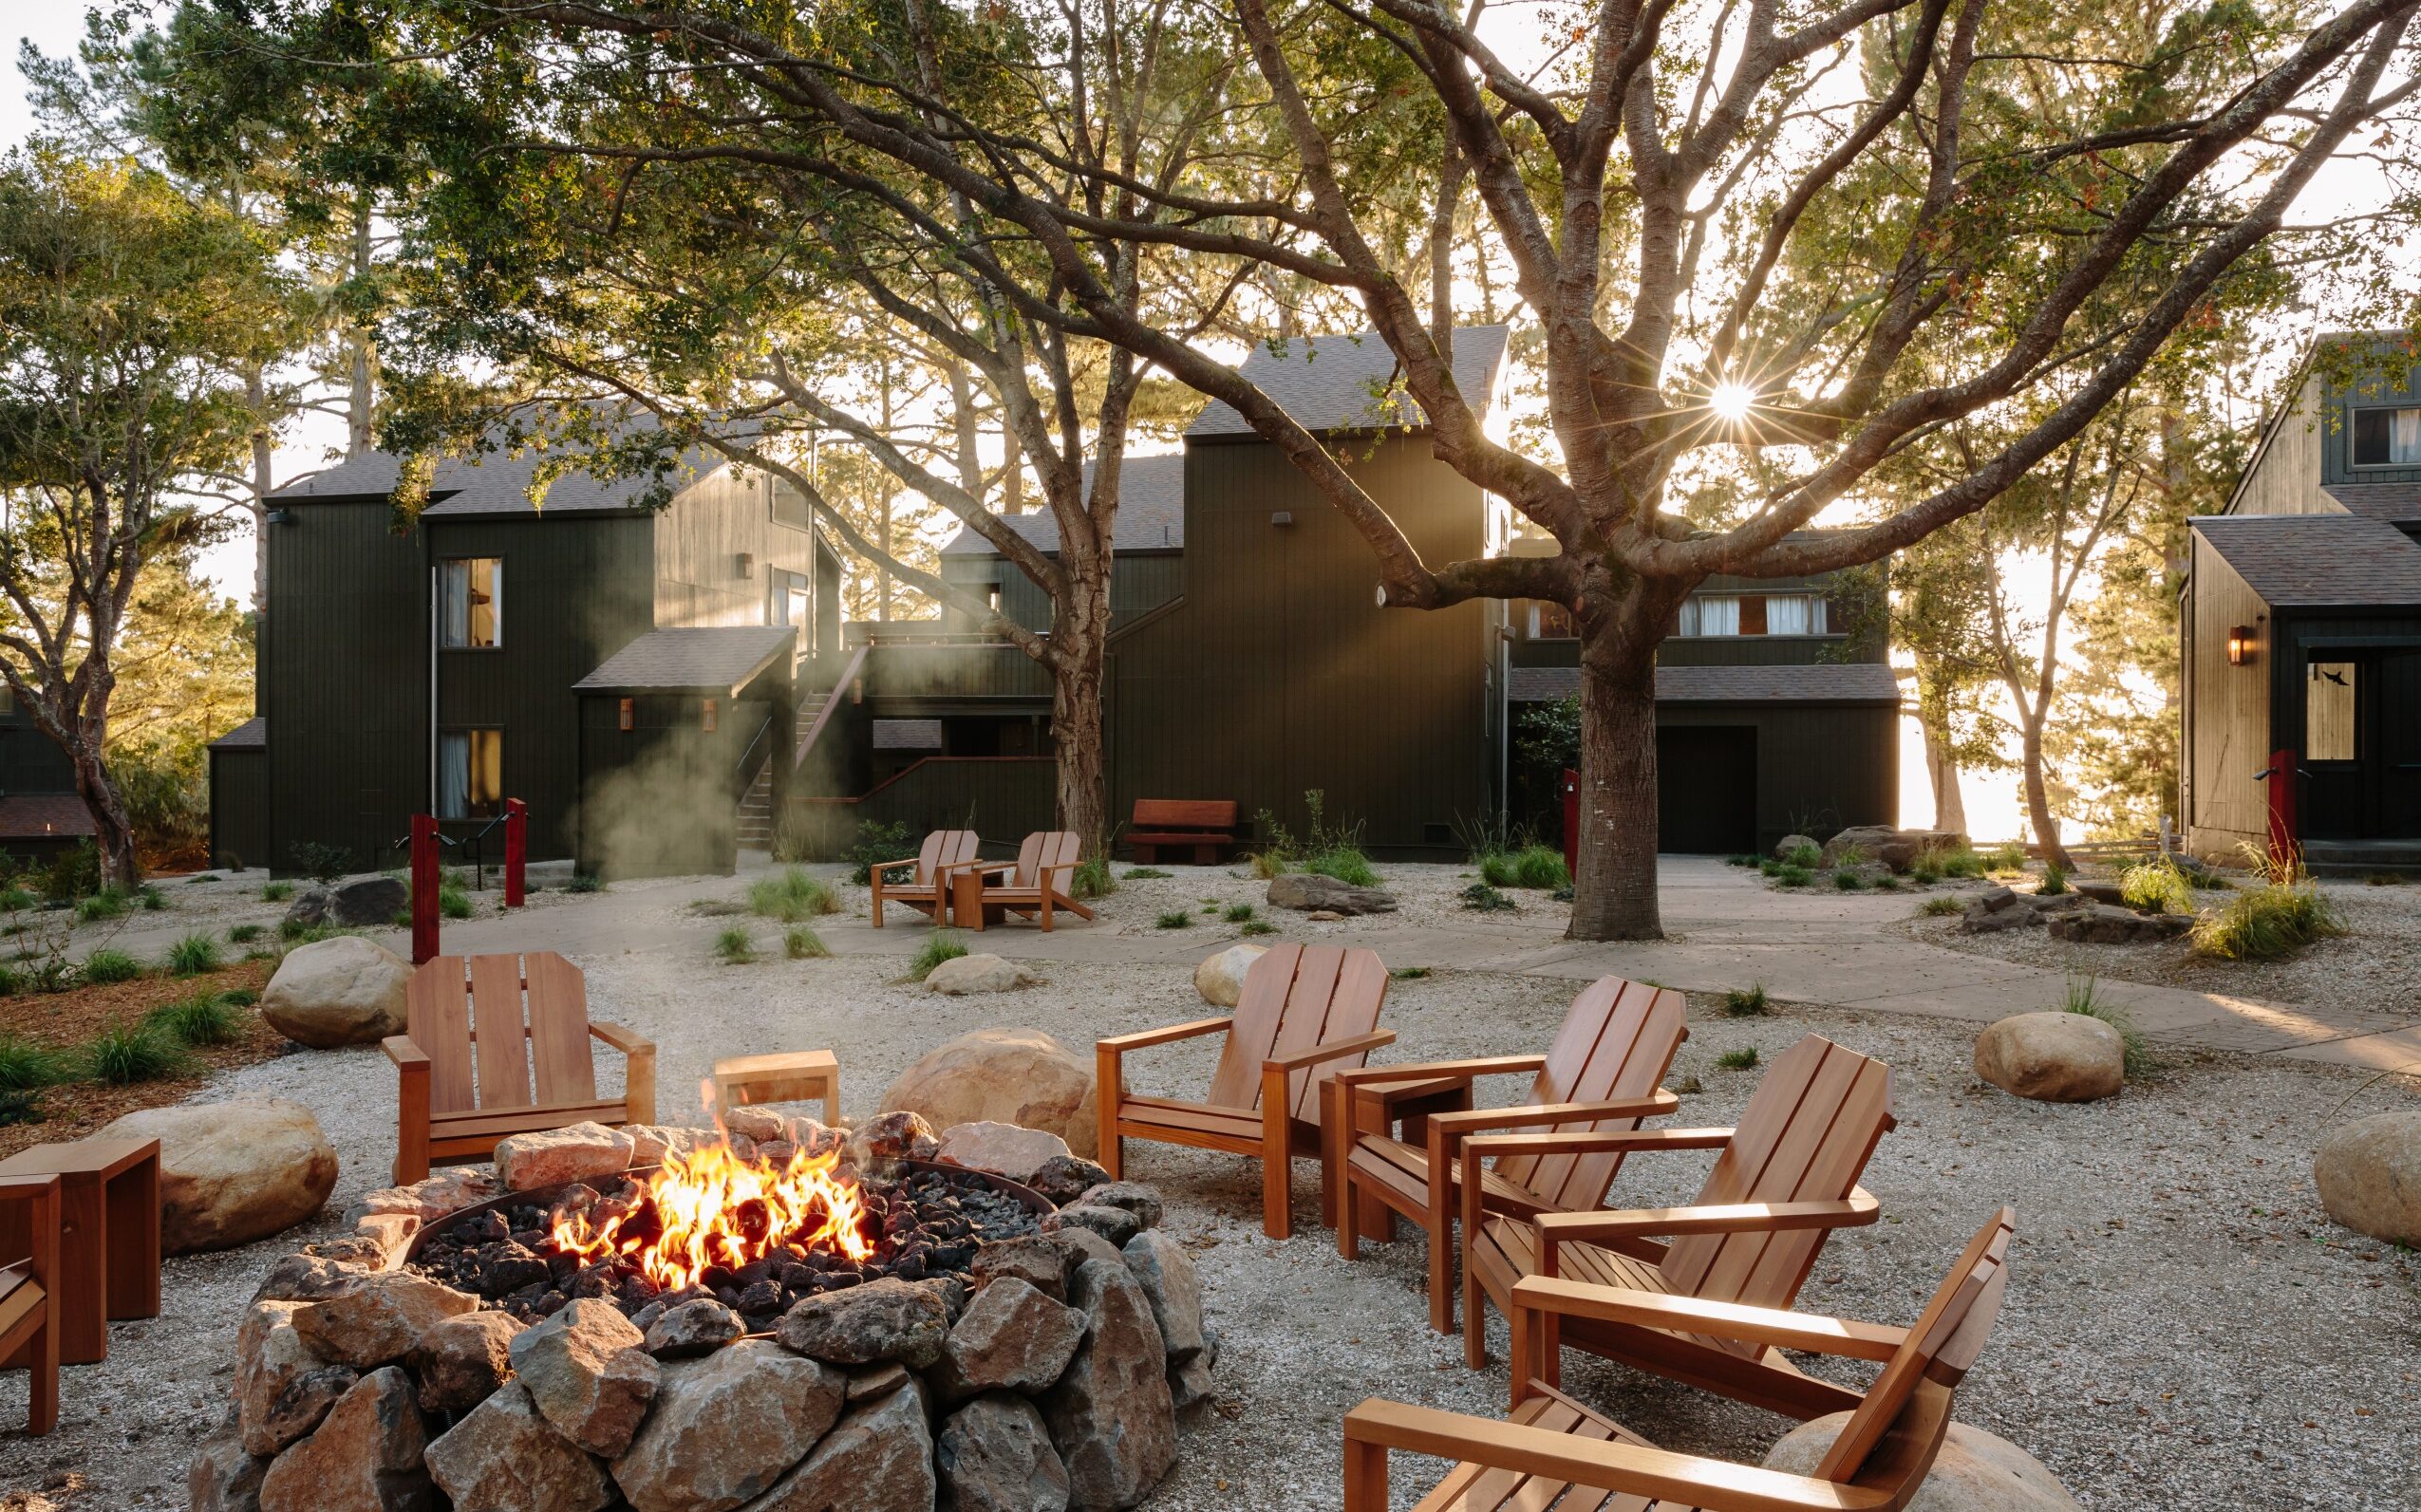 Lodge at Marconi Is a New Nature-Infused Hotel That Will Make You Fall in Love with Northern California